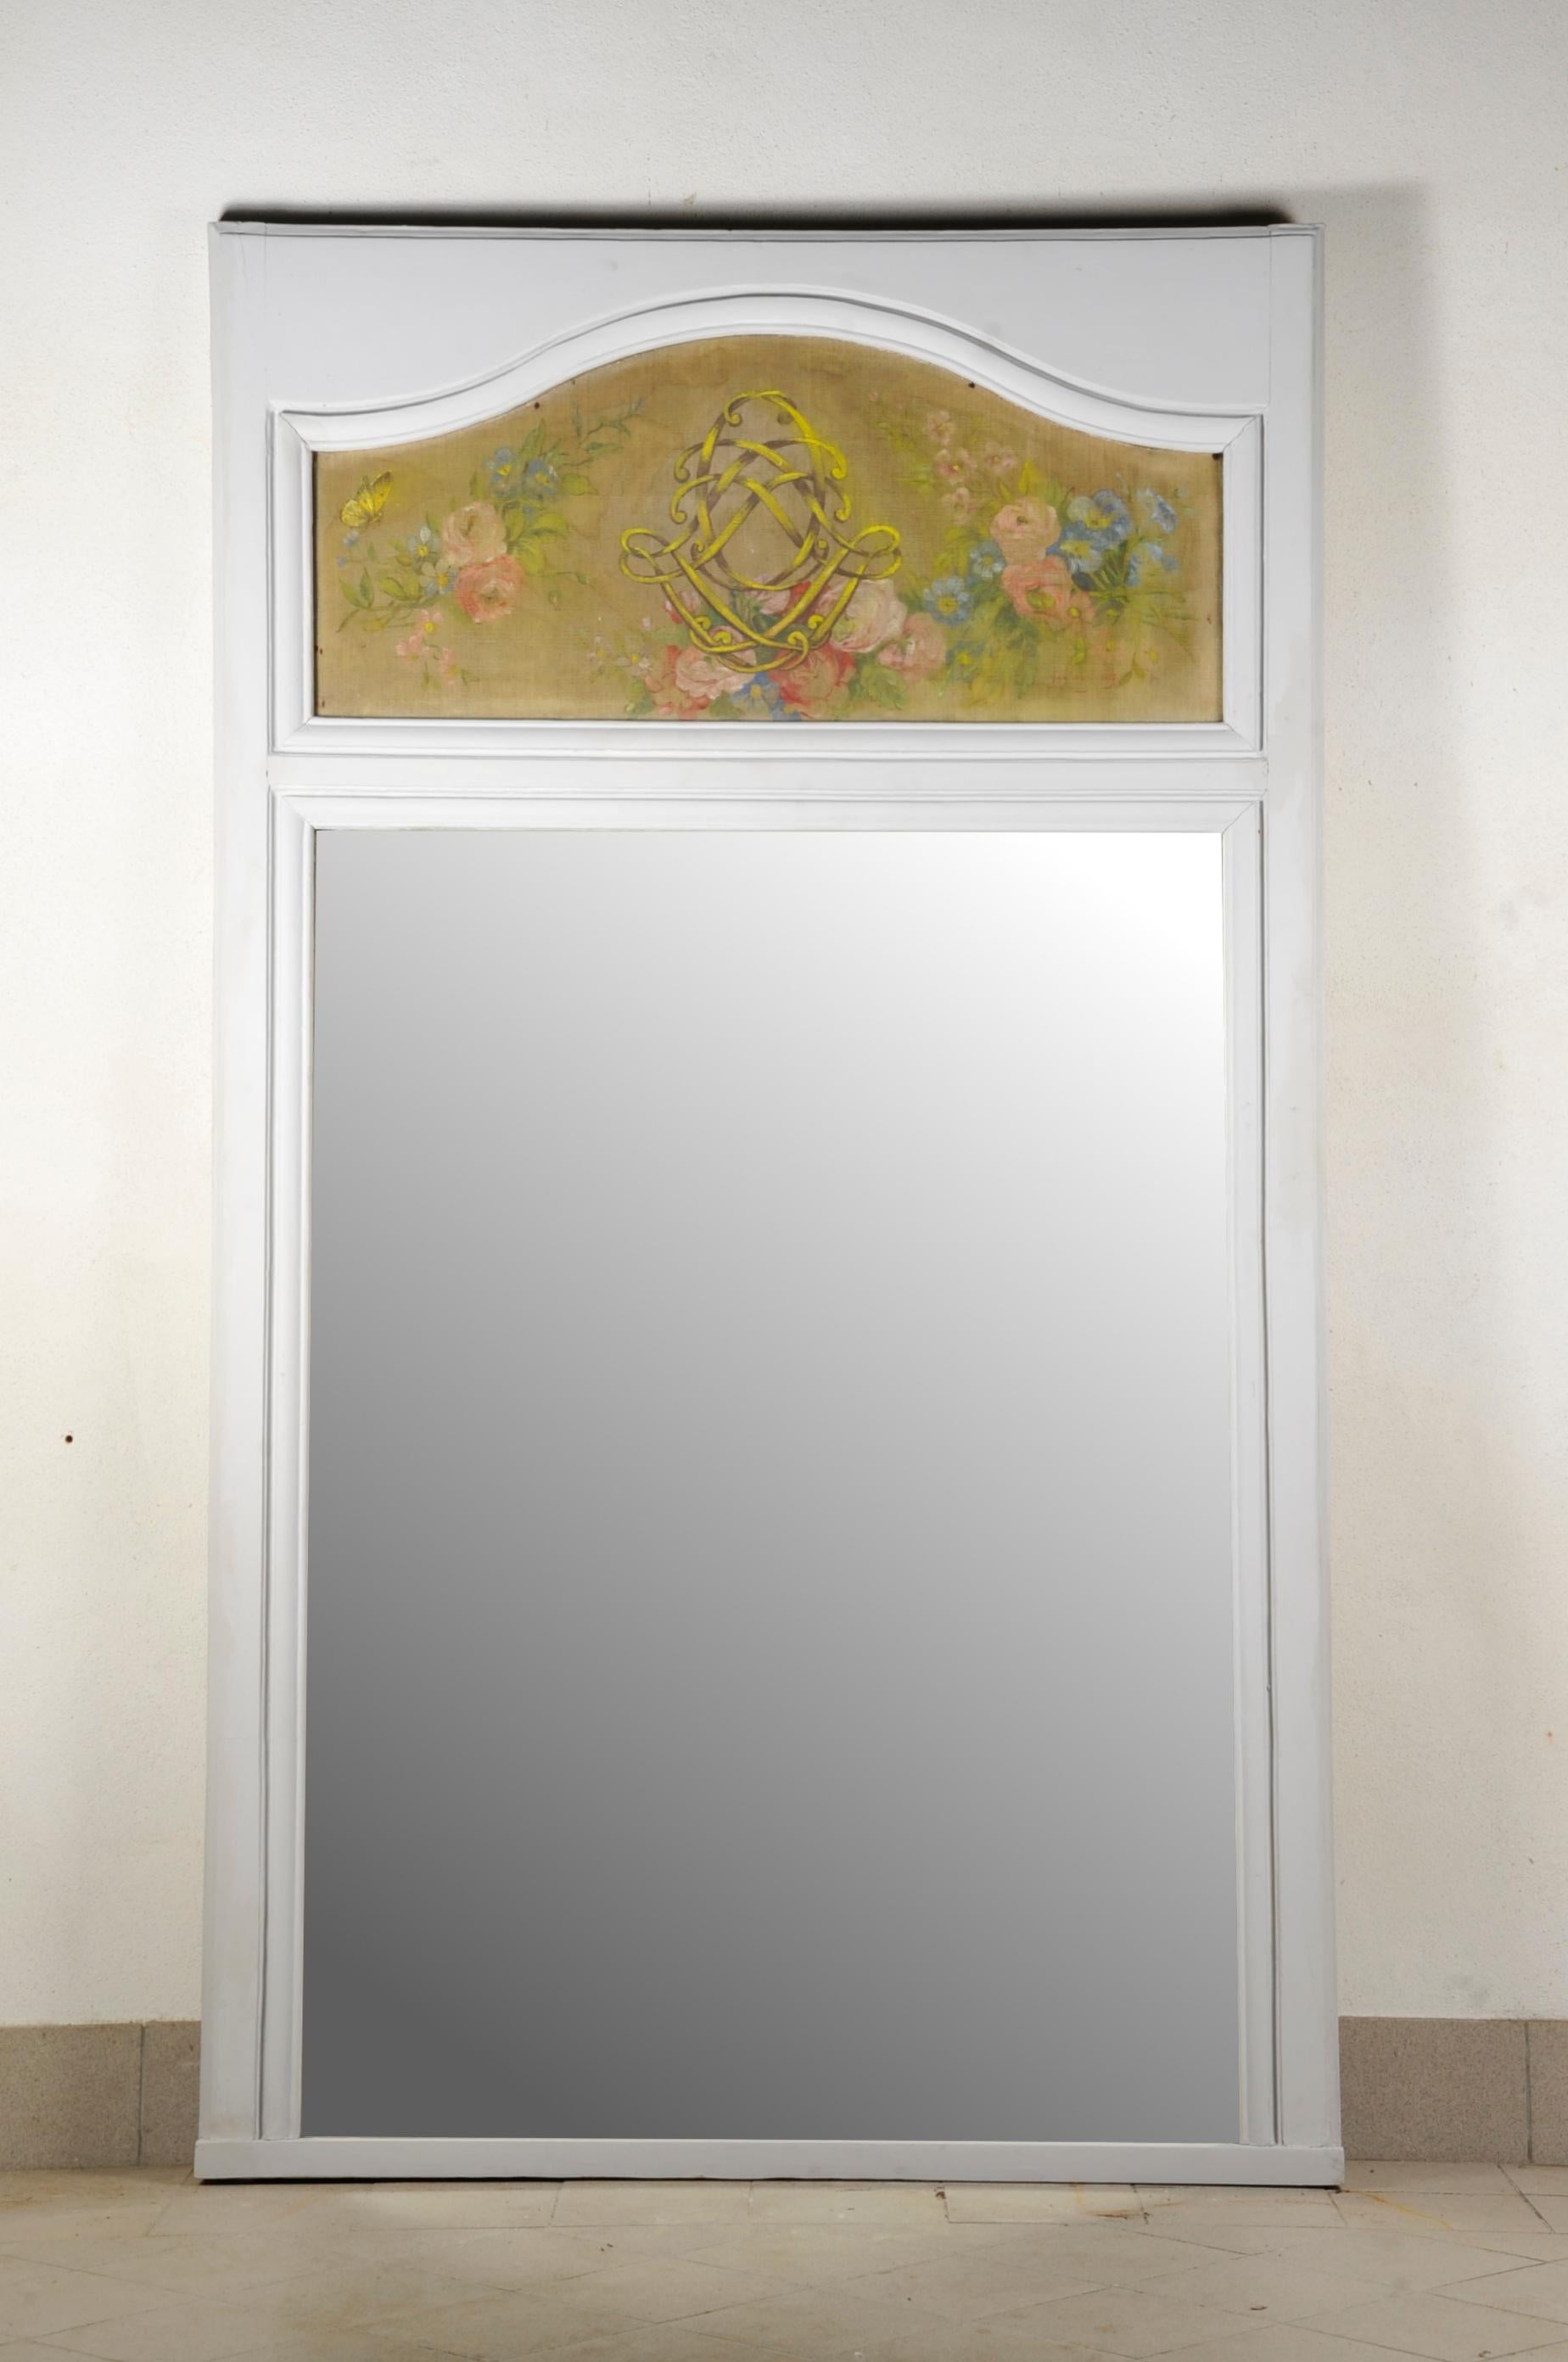 Large gray lacquered wood paneling trumeau composed of a large mirror and a gouache on canvas decorated with floral bouquets, a butterfly and a central ornament featuring intertwined ribbons probably representing a monogram (interlaced double L's